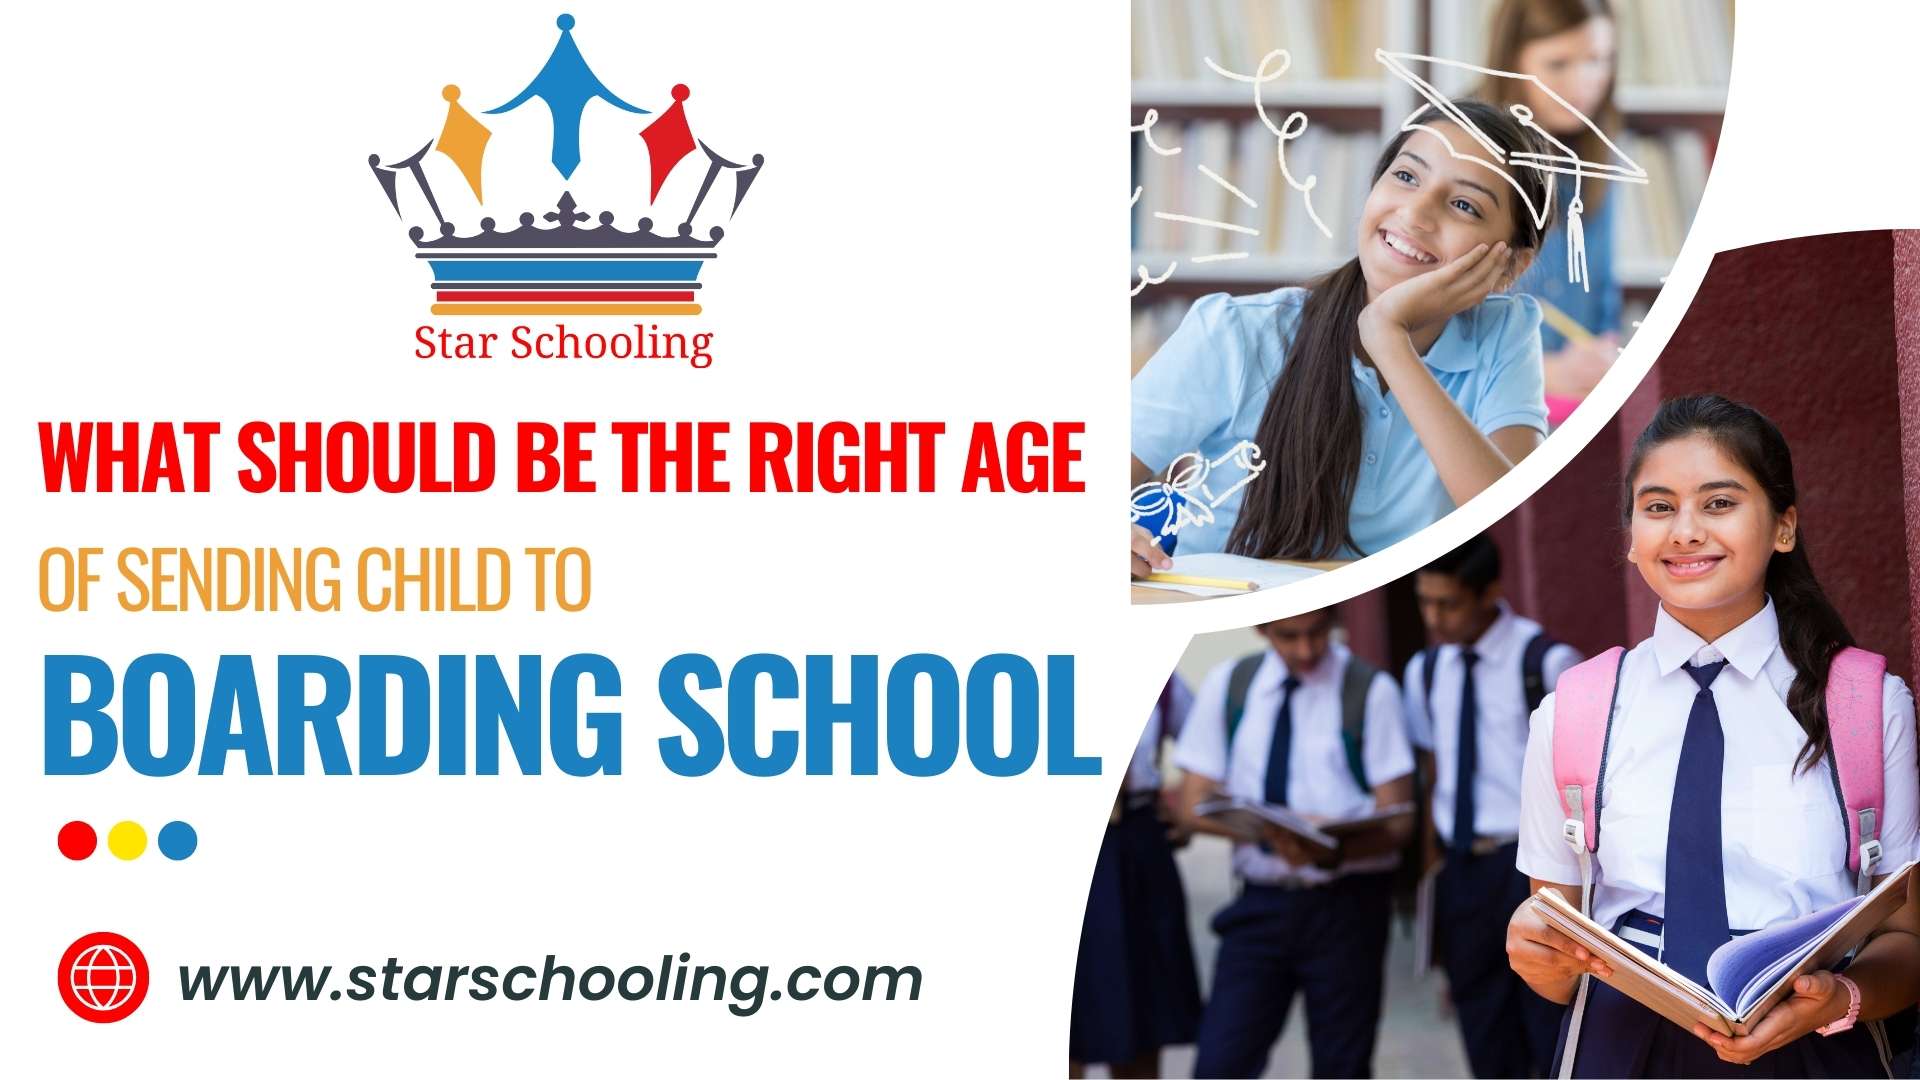 What should be the right age of sending child to boarding school